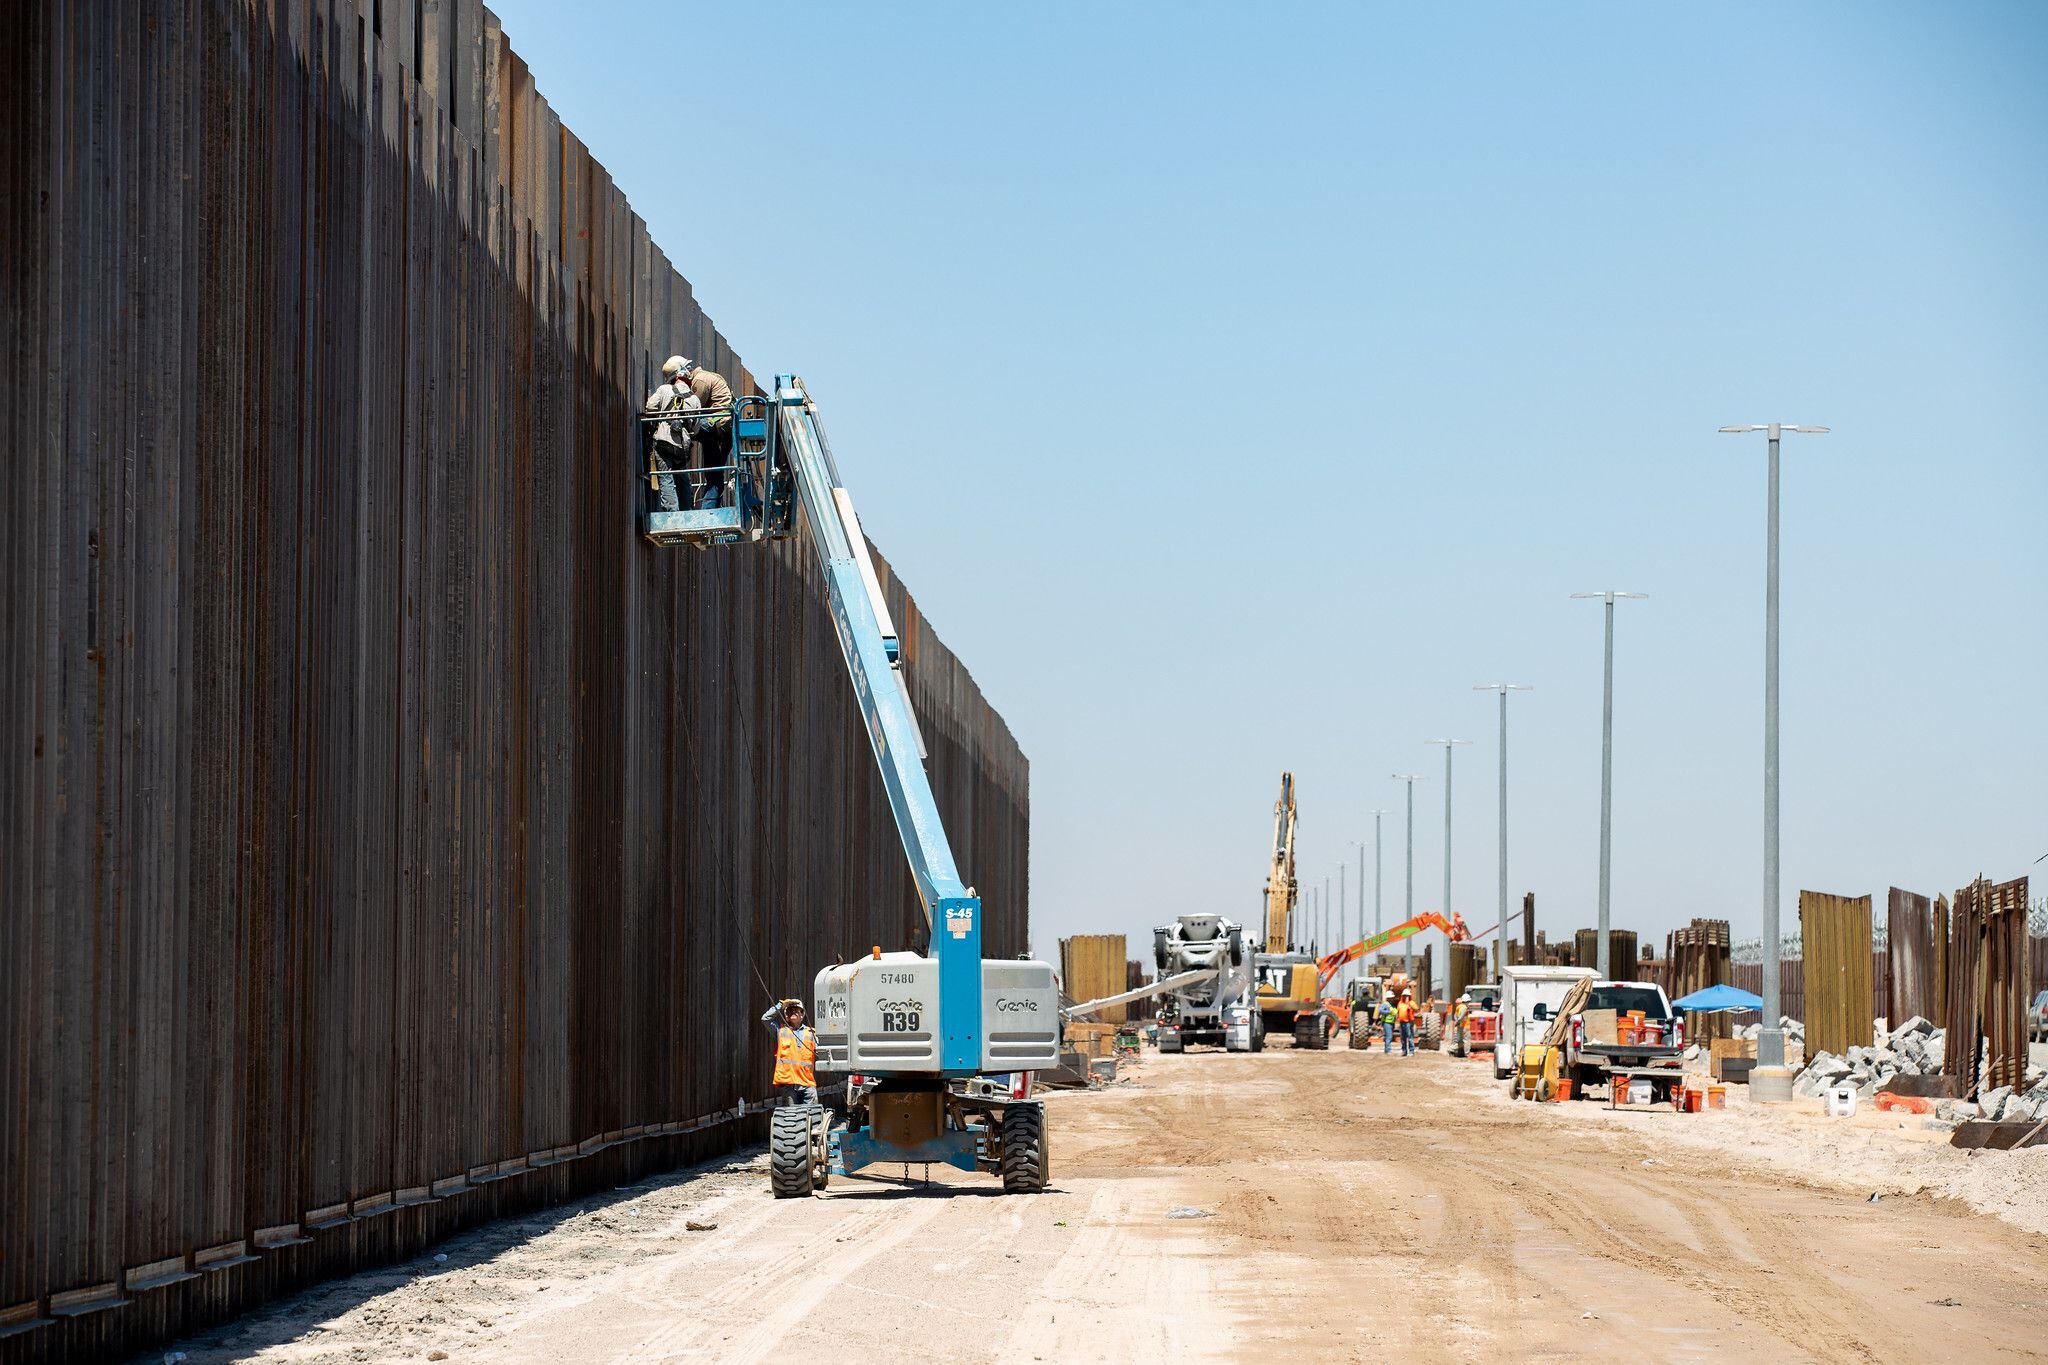 Photograph showing new bollard wall constructed in place of antiquated infrastructure, near Yuma, AZ on Tuesday, July 16, 2019.  U.S. Customs and Border Protection photo by Jerry Glaser